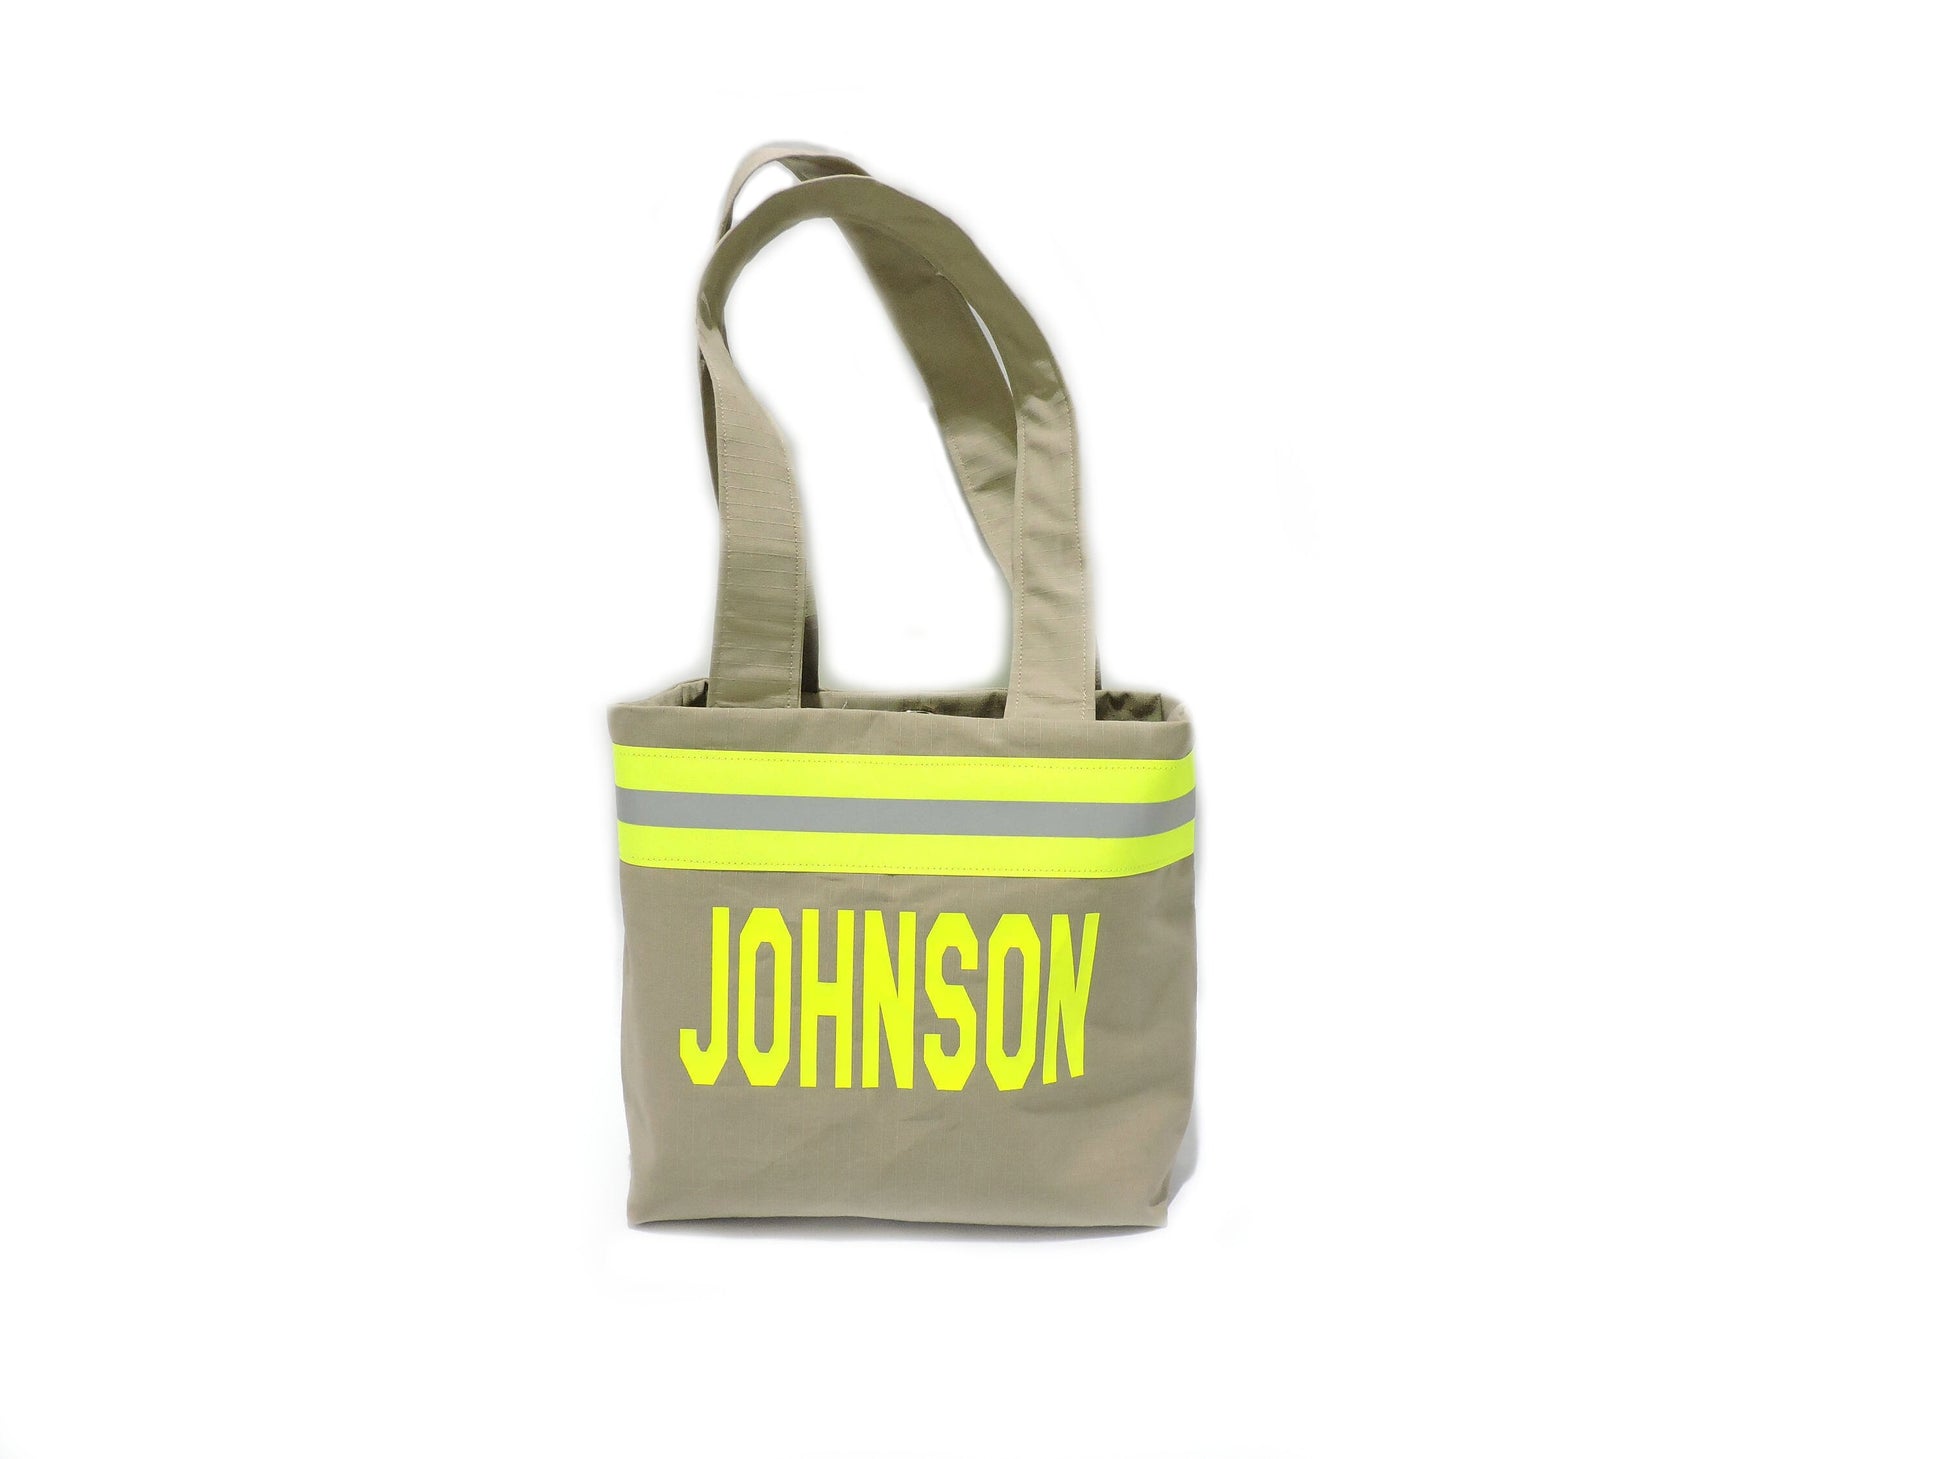 Tan Fabric Neon Yellow Reflective Tape Firefighter Wife Purse